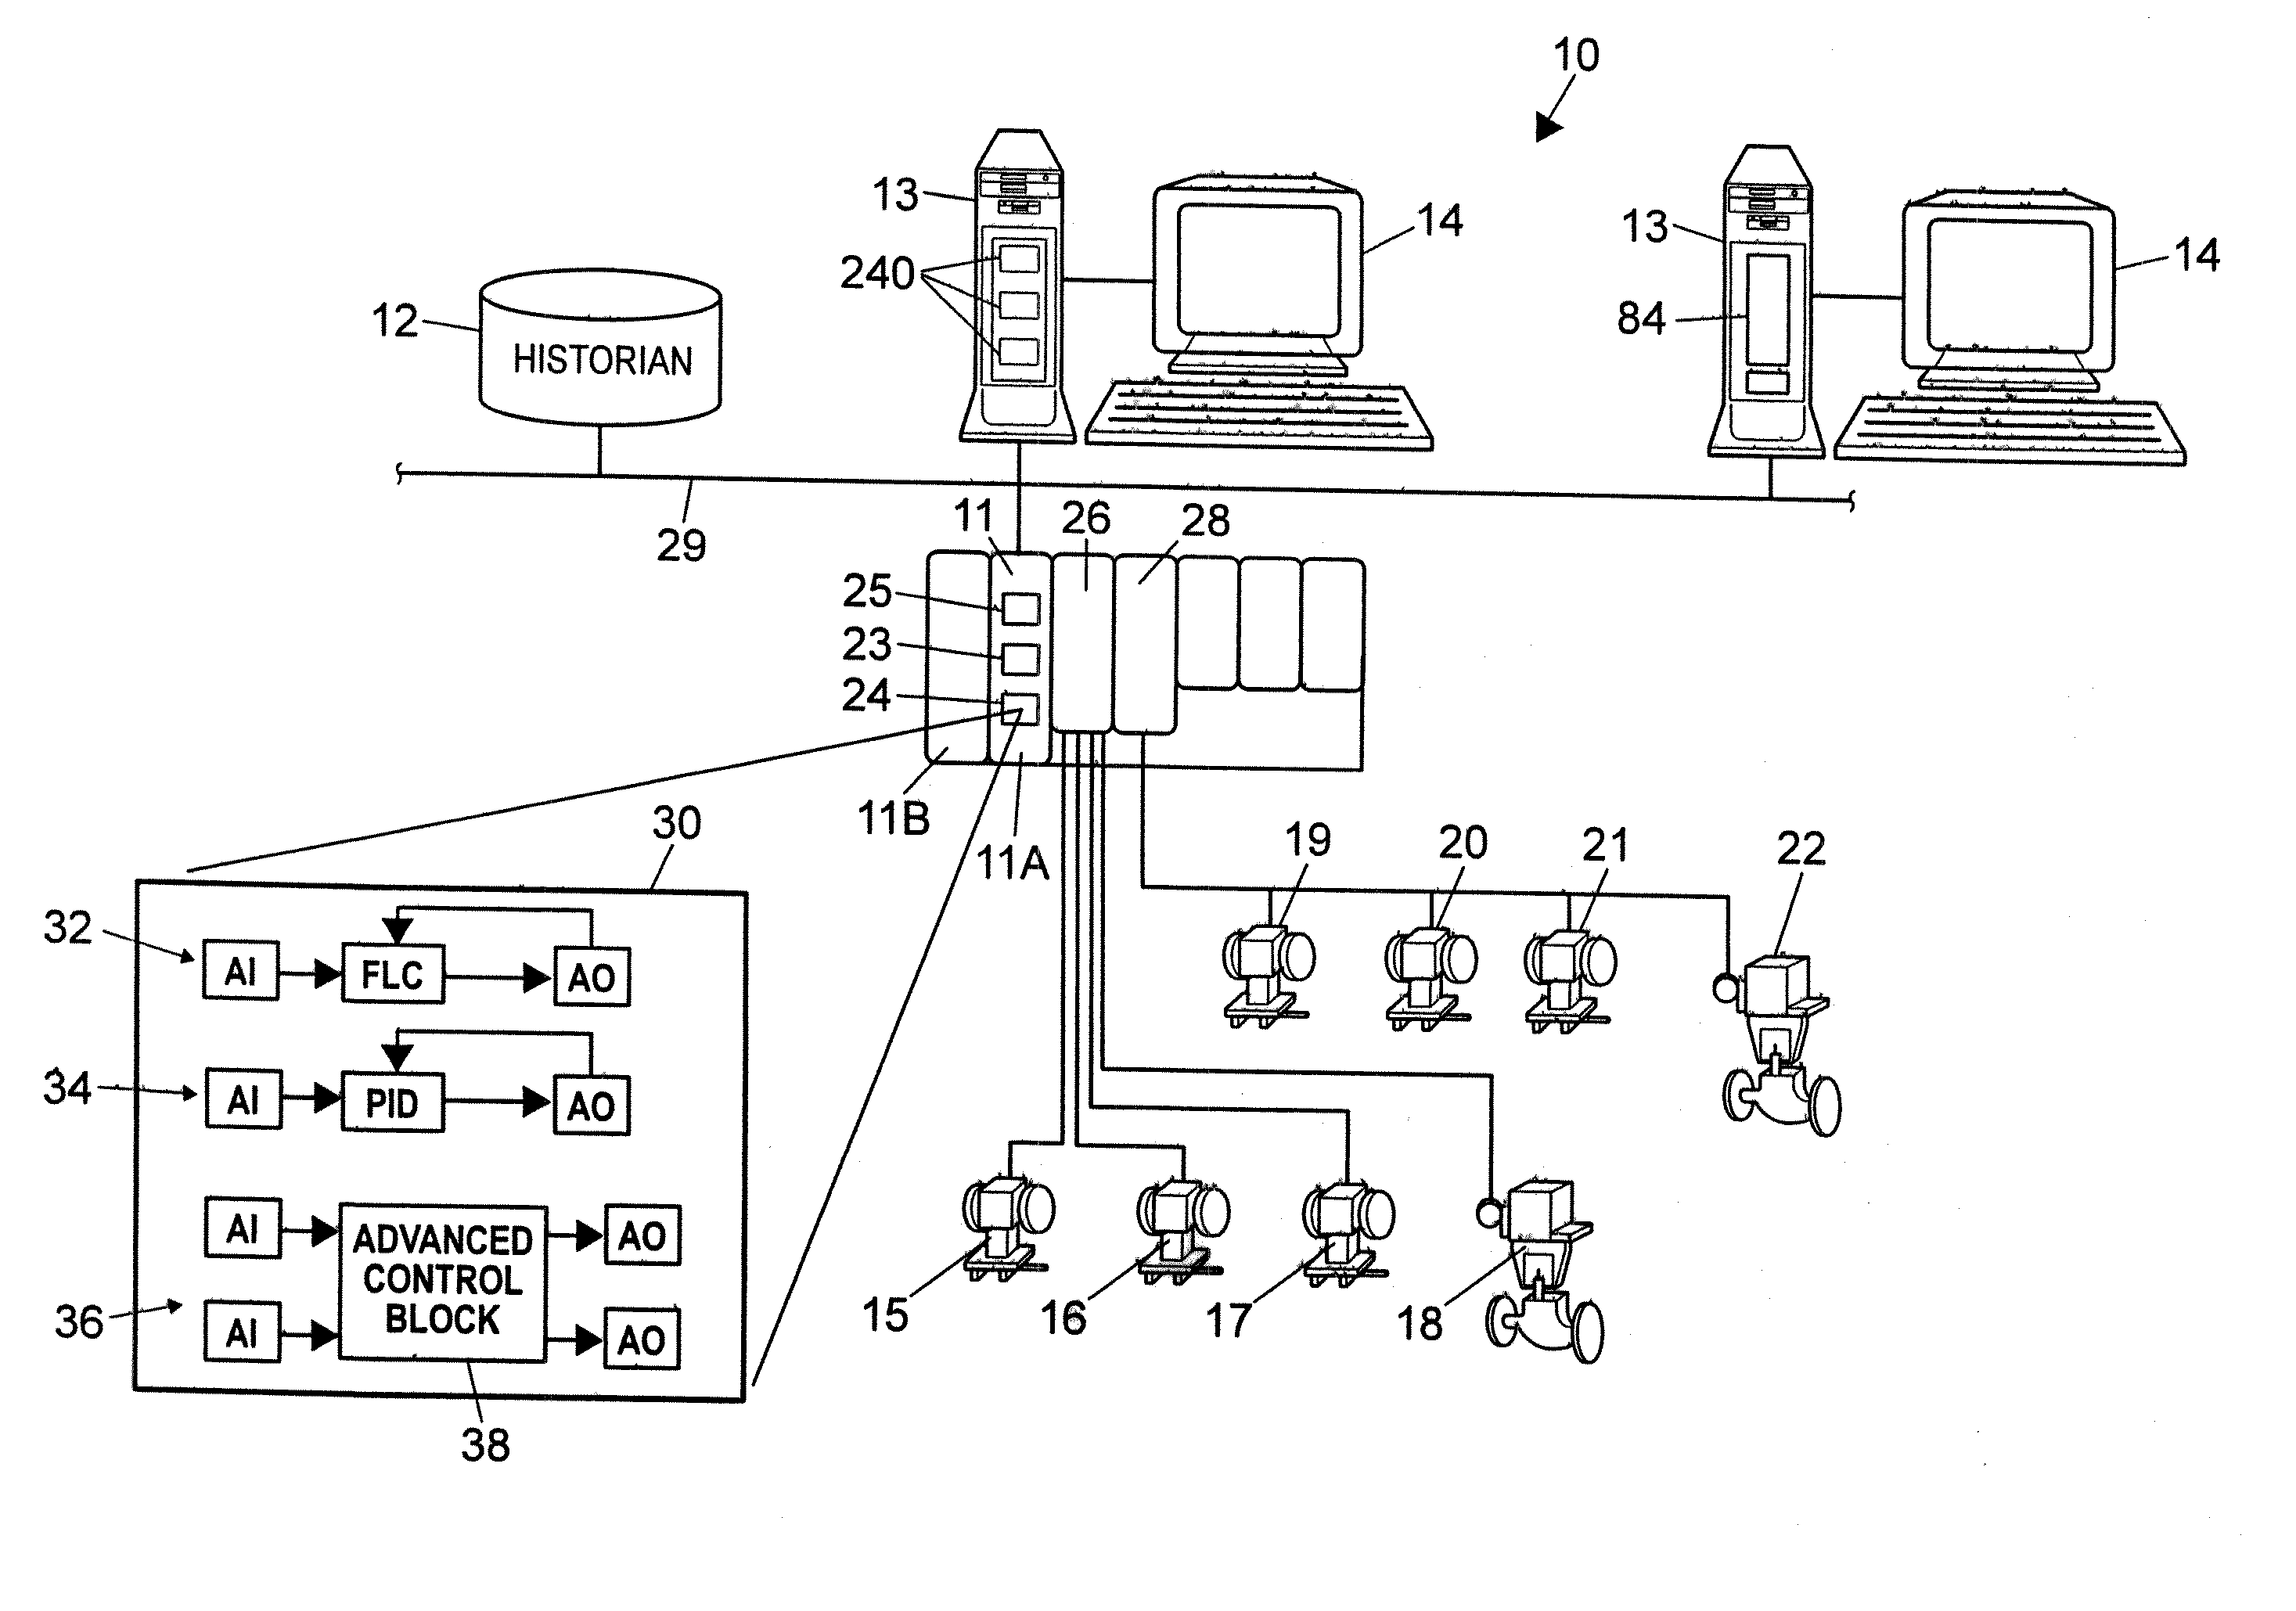 Analytical Server Integrated in a Process Control Network